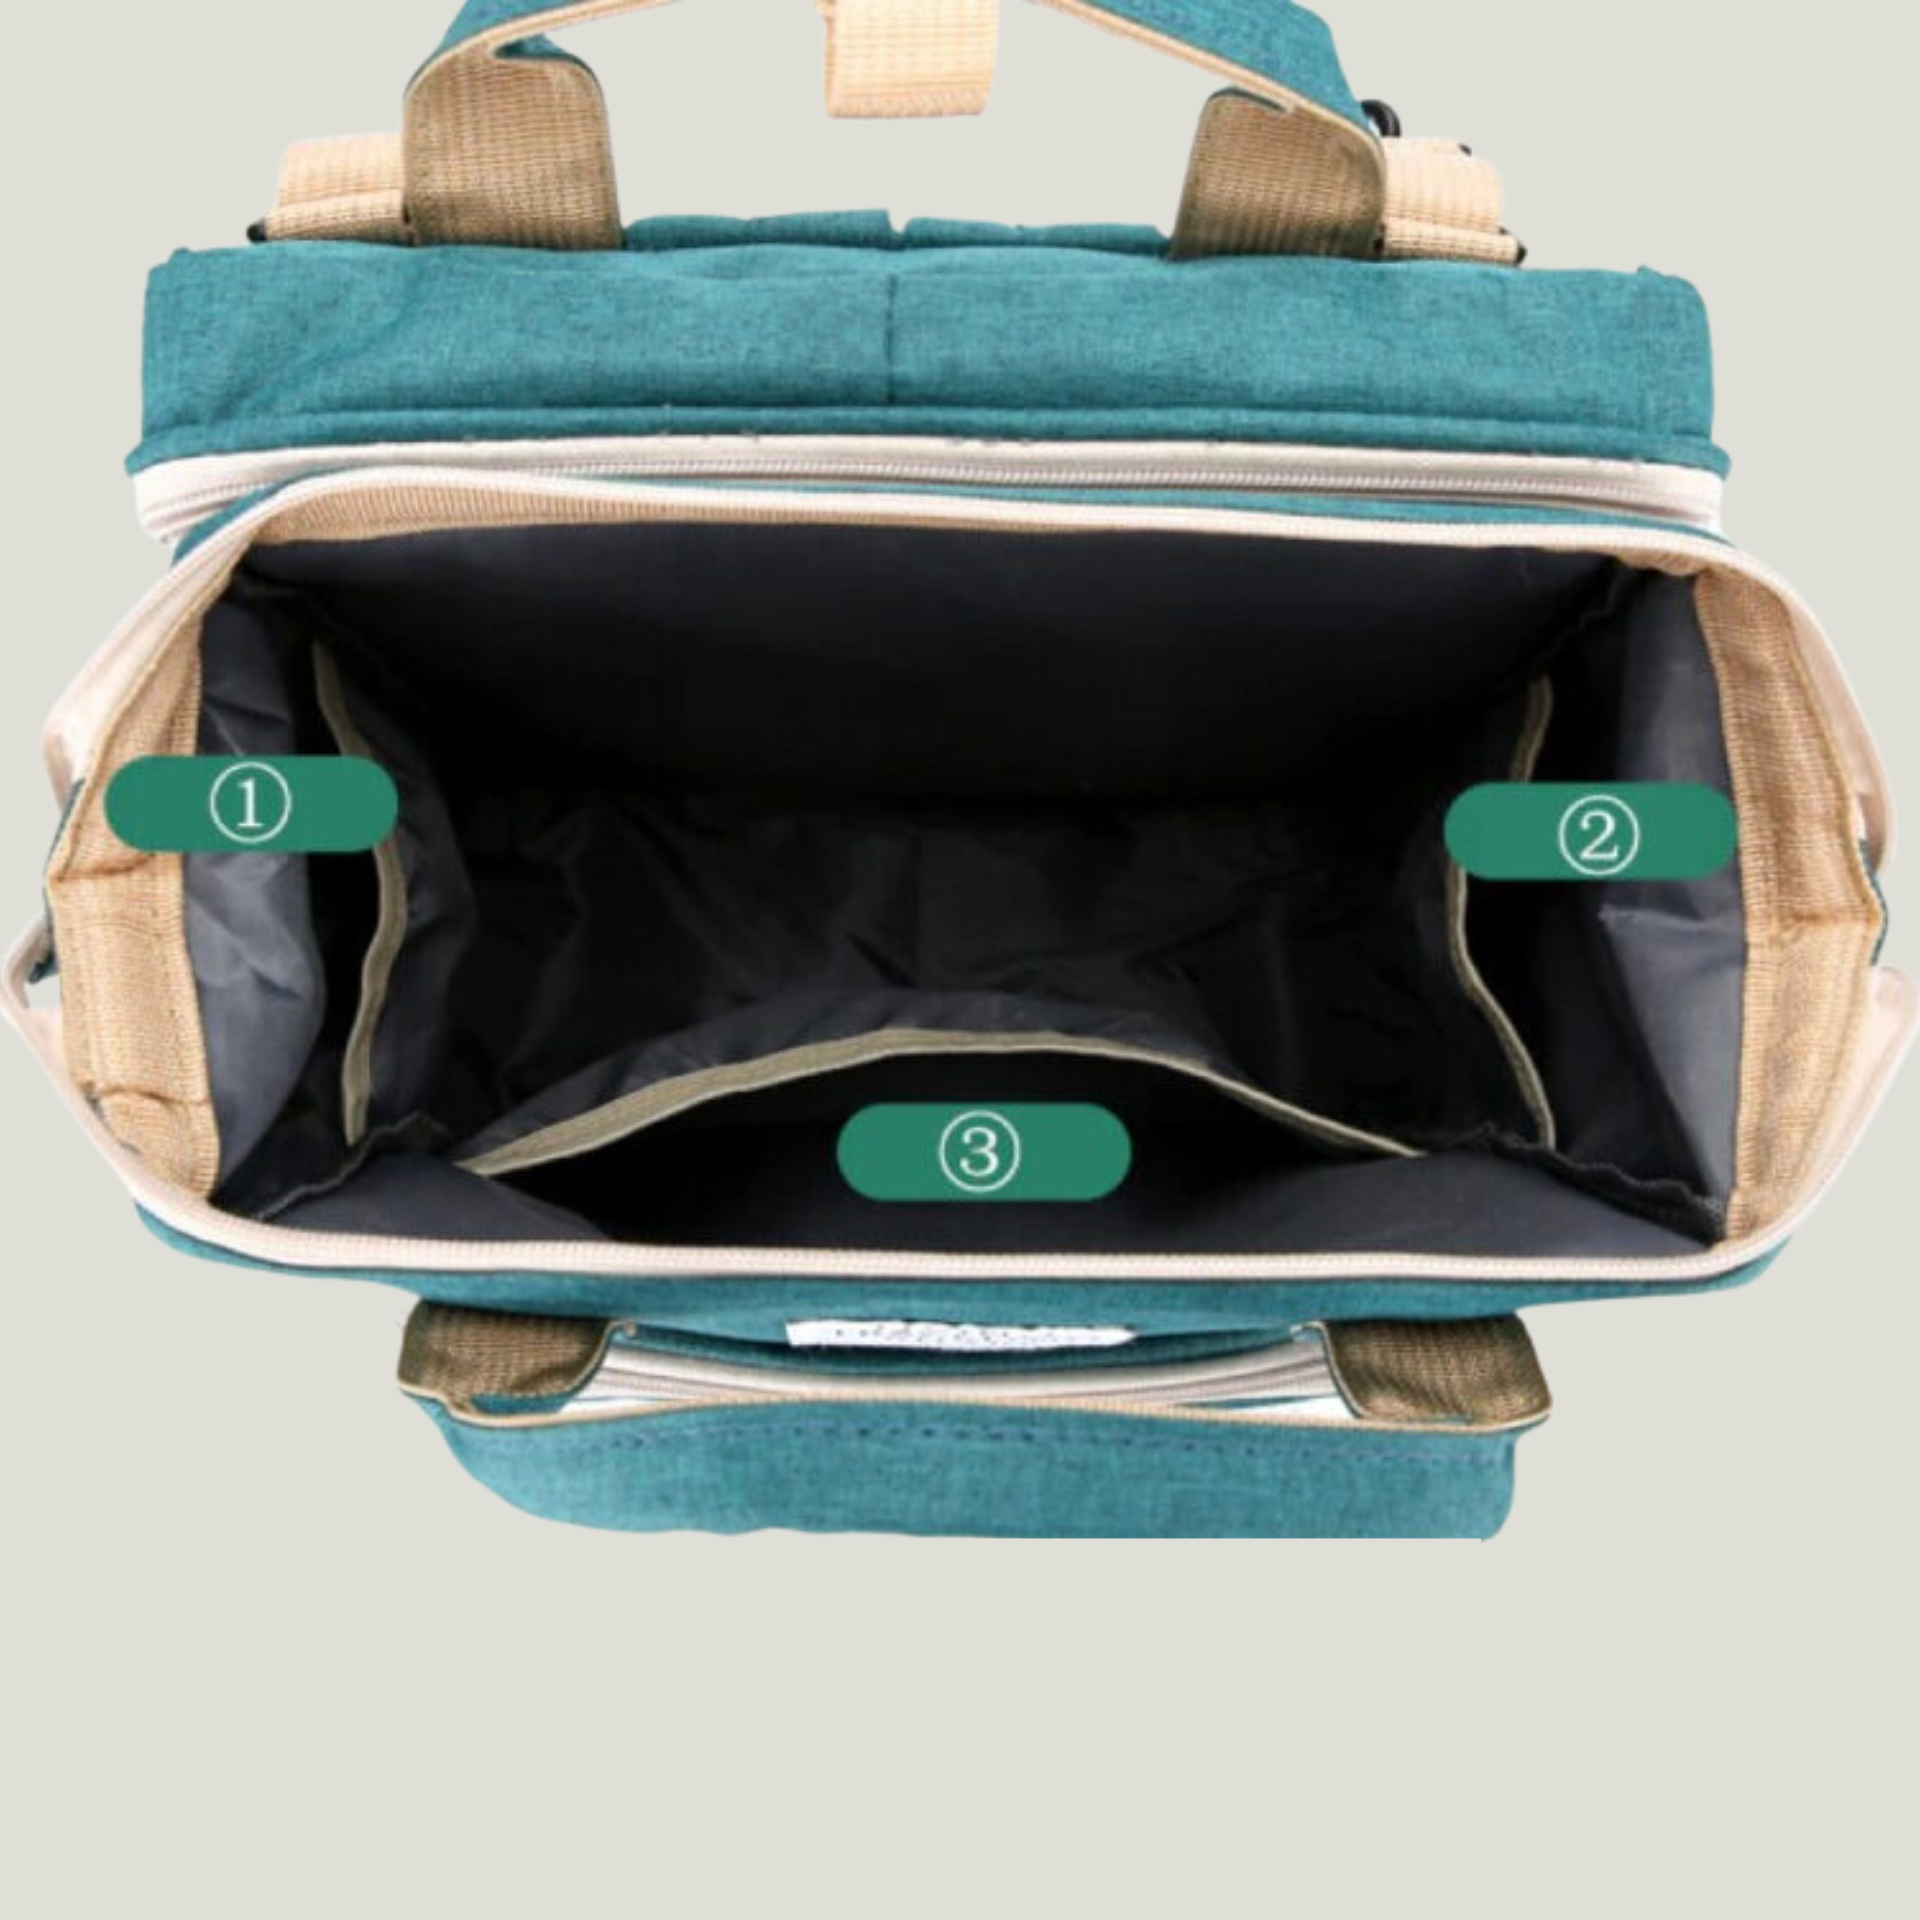 ChicMom All-in-One NomadNest bag